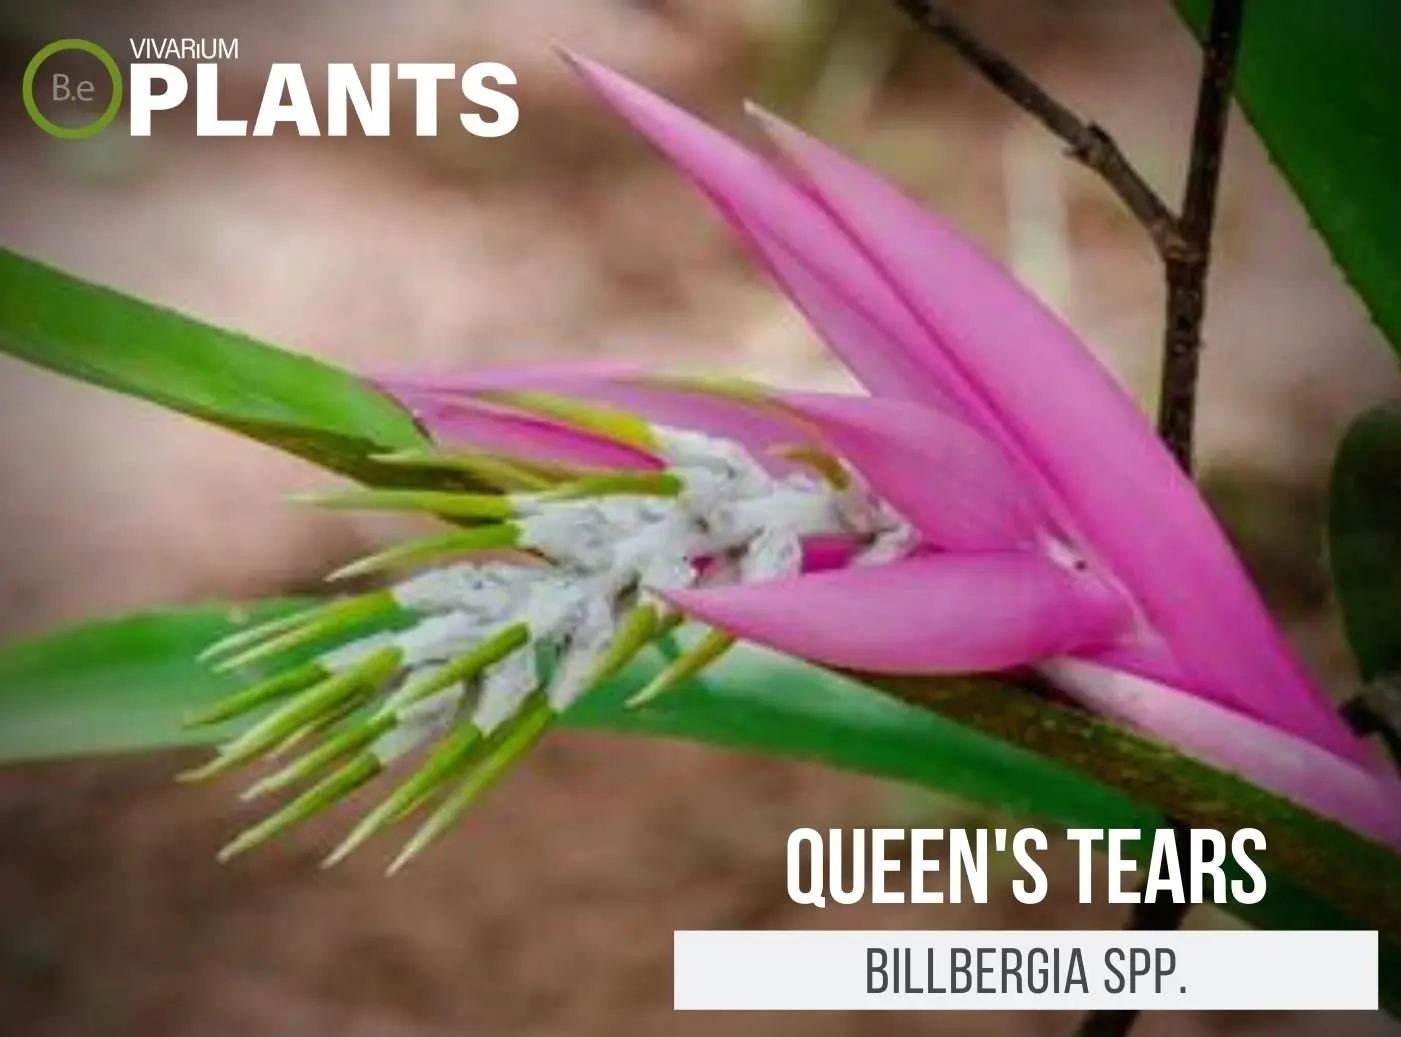 Queen's Tears "Billbergia spp." Plant Care Guide